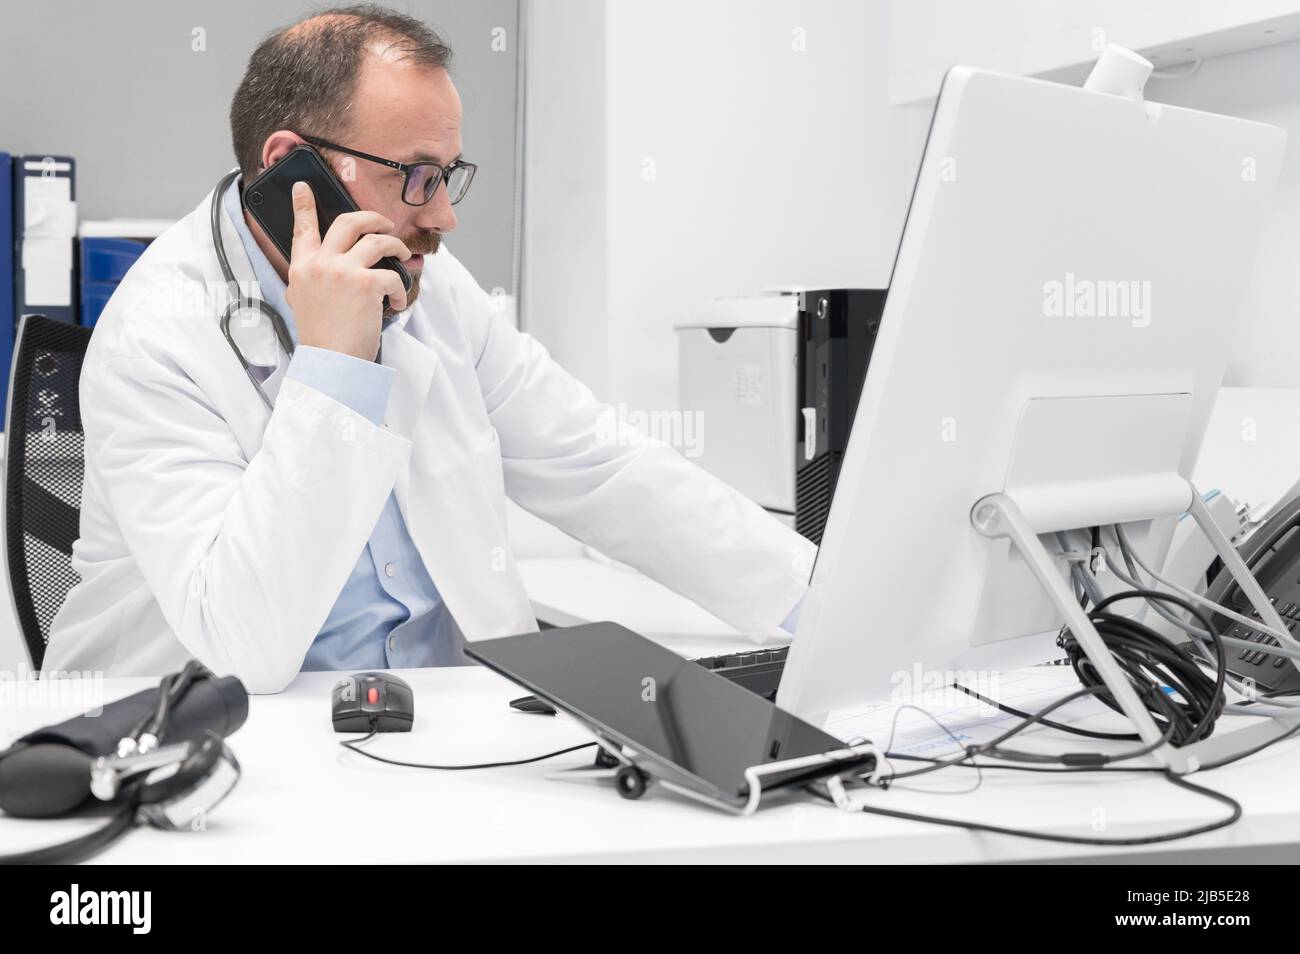 Doctor in office talking on phone. High quality photography. Stock Photo